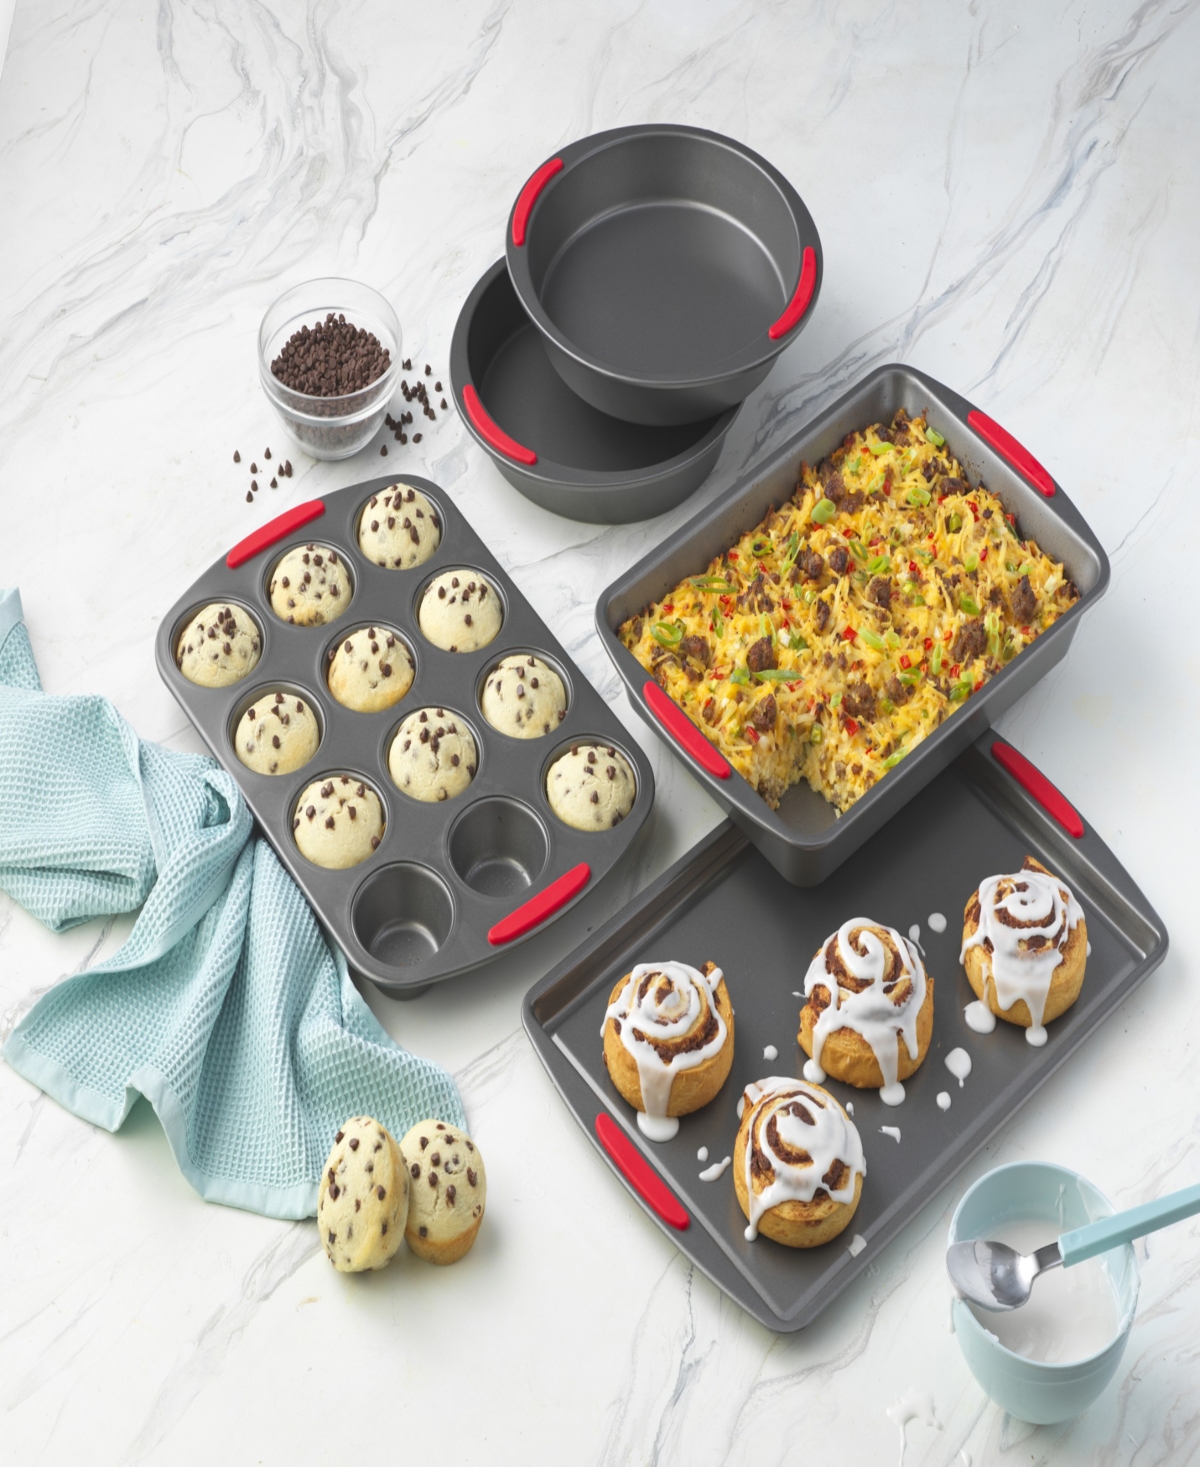 Shop Good Cook Mega Grip 5 Piece Nonstick Steel Bakeware Set With Cookie Sheet, Roast Pan, 2 Cake Pans, And Muffin  In Gray